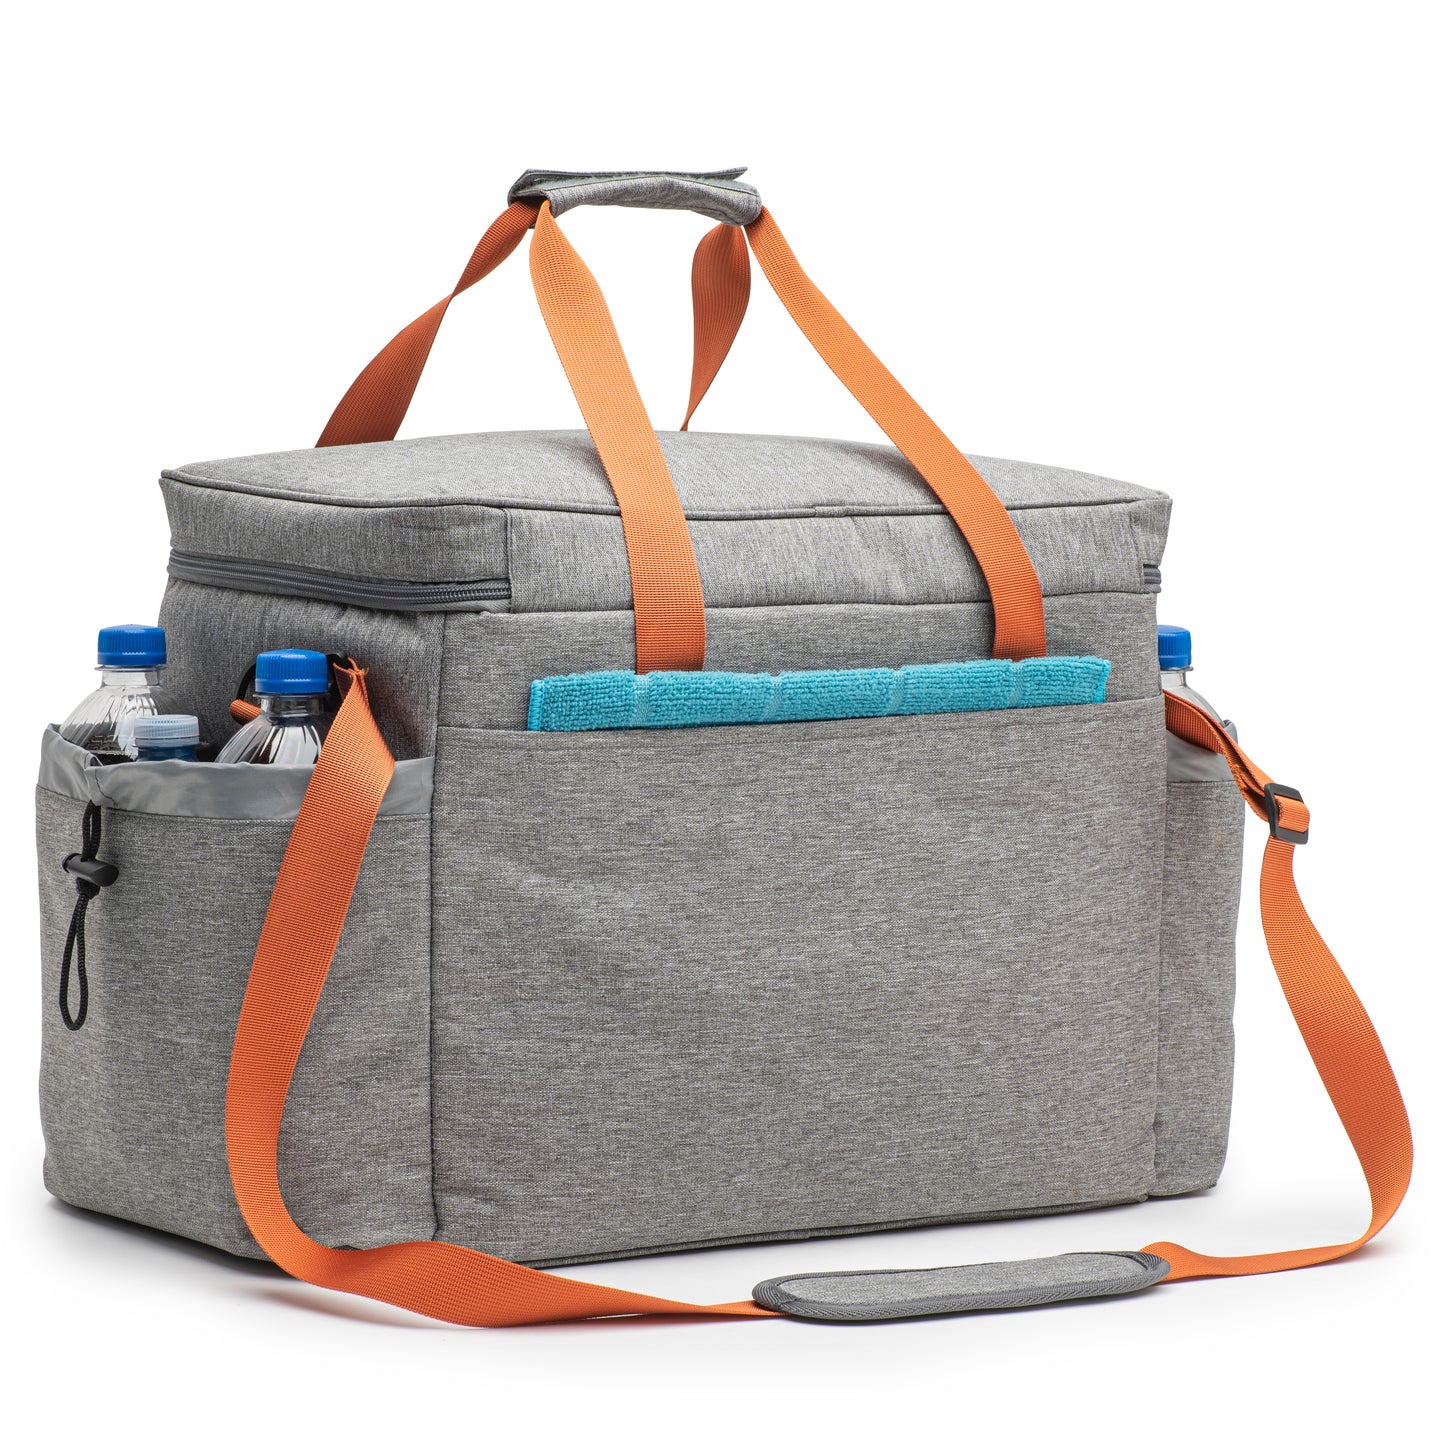 XX-Large Cooler Bag with Hard Bottom (16x13x10 in). Heavy Duty Fabric, Thick Foam Insulation, Heat Sealed Liner.